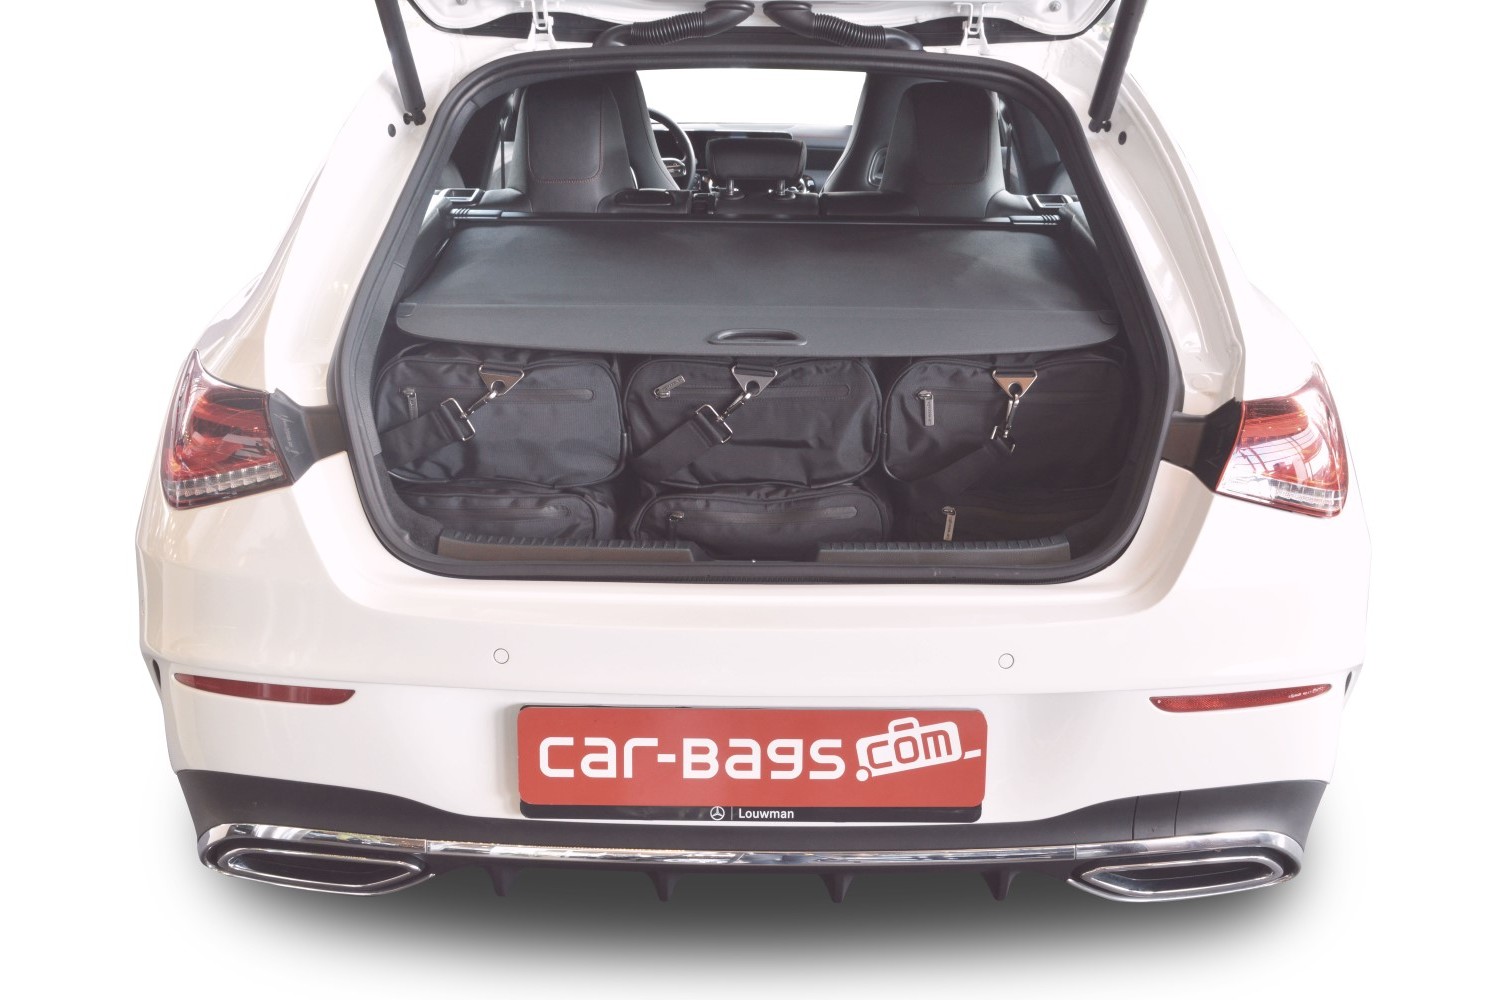 Mercedes-Benz CLA Shooting Brake X117 2015-Present Car-Bags Travel Bags Made in EU Perfect Fit